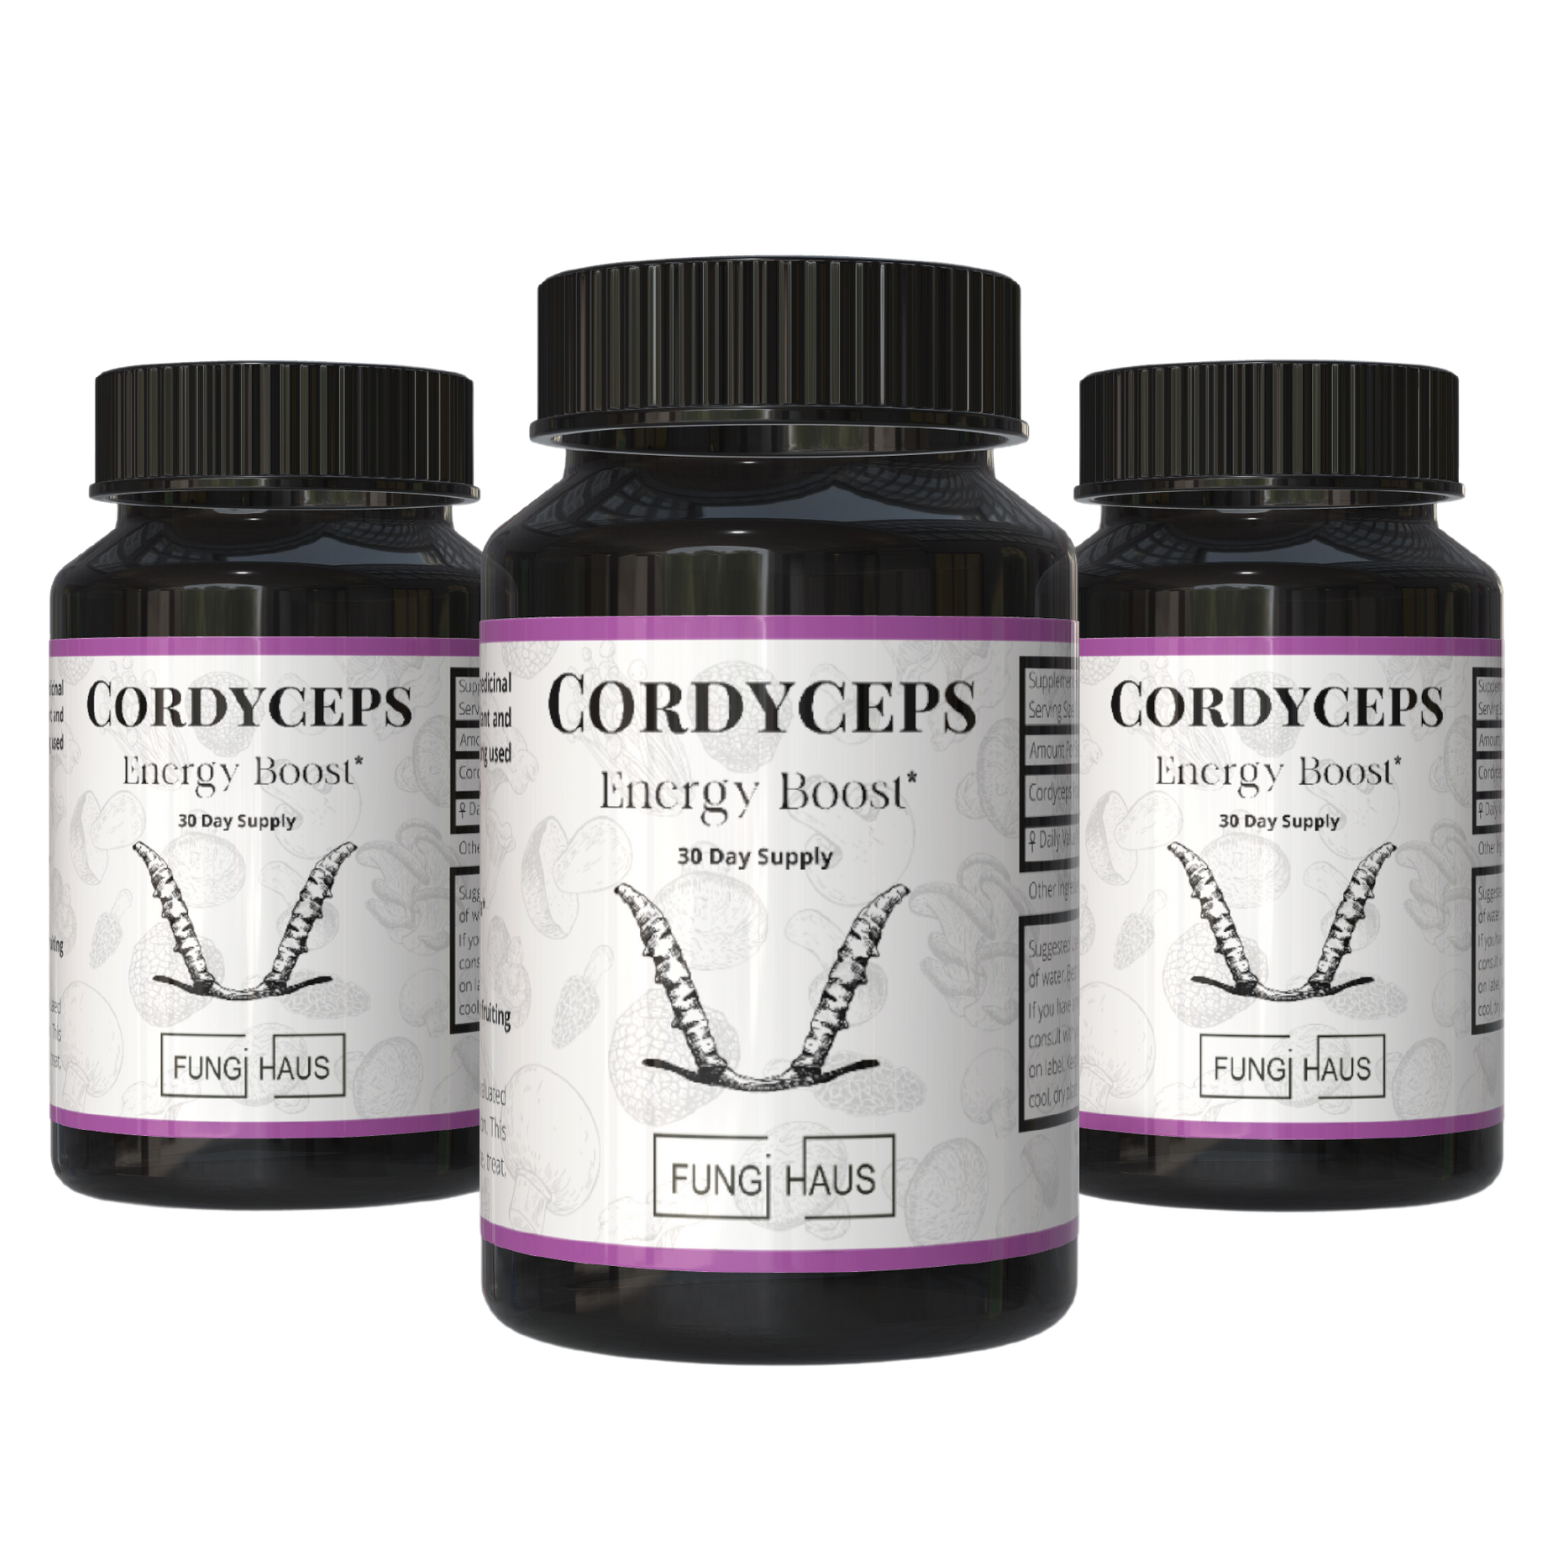 Cordyceps Energy Boost* - 30 Day Supply - Capsules